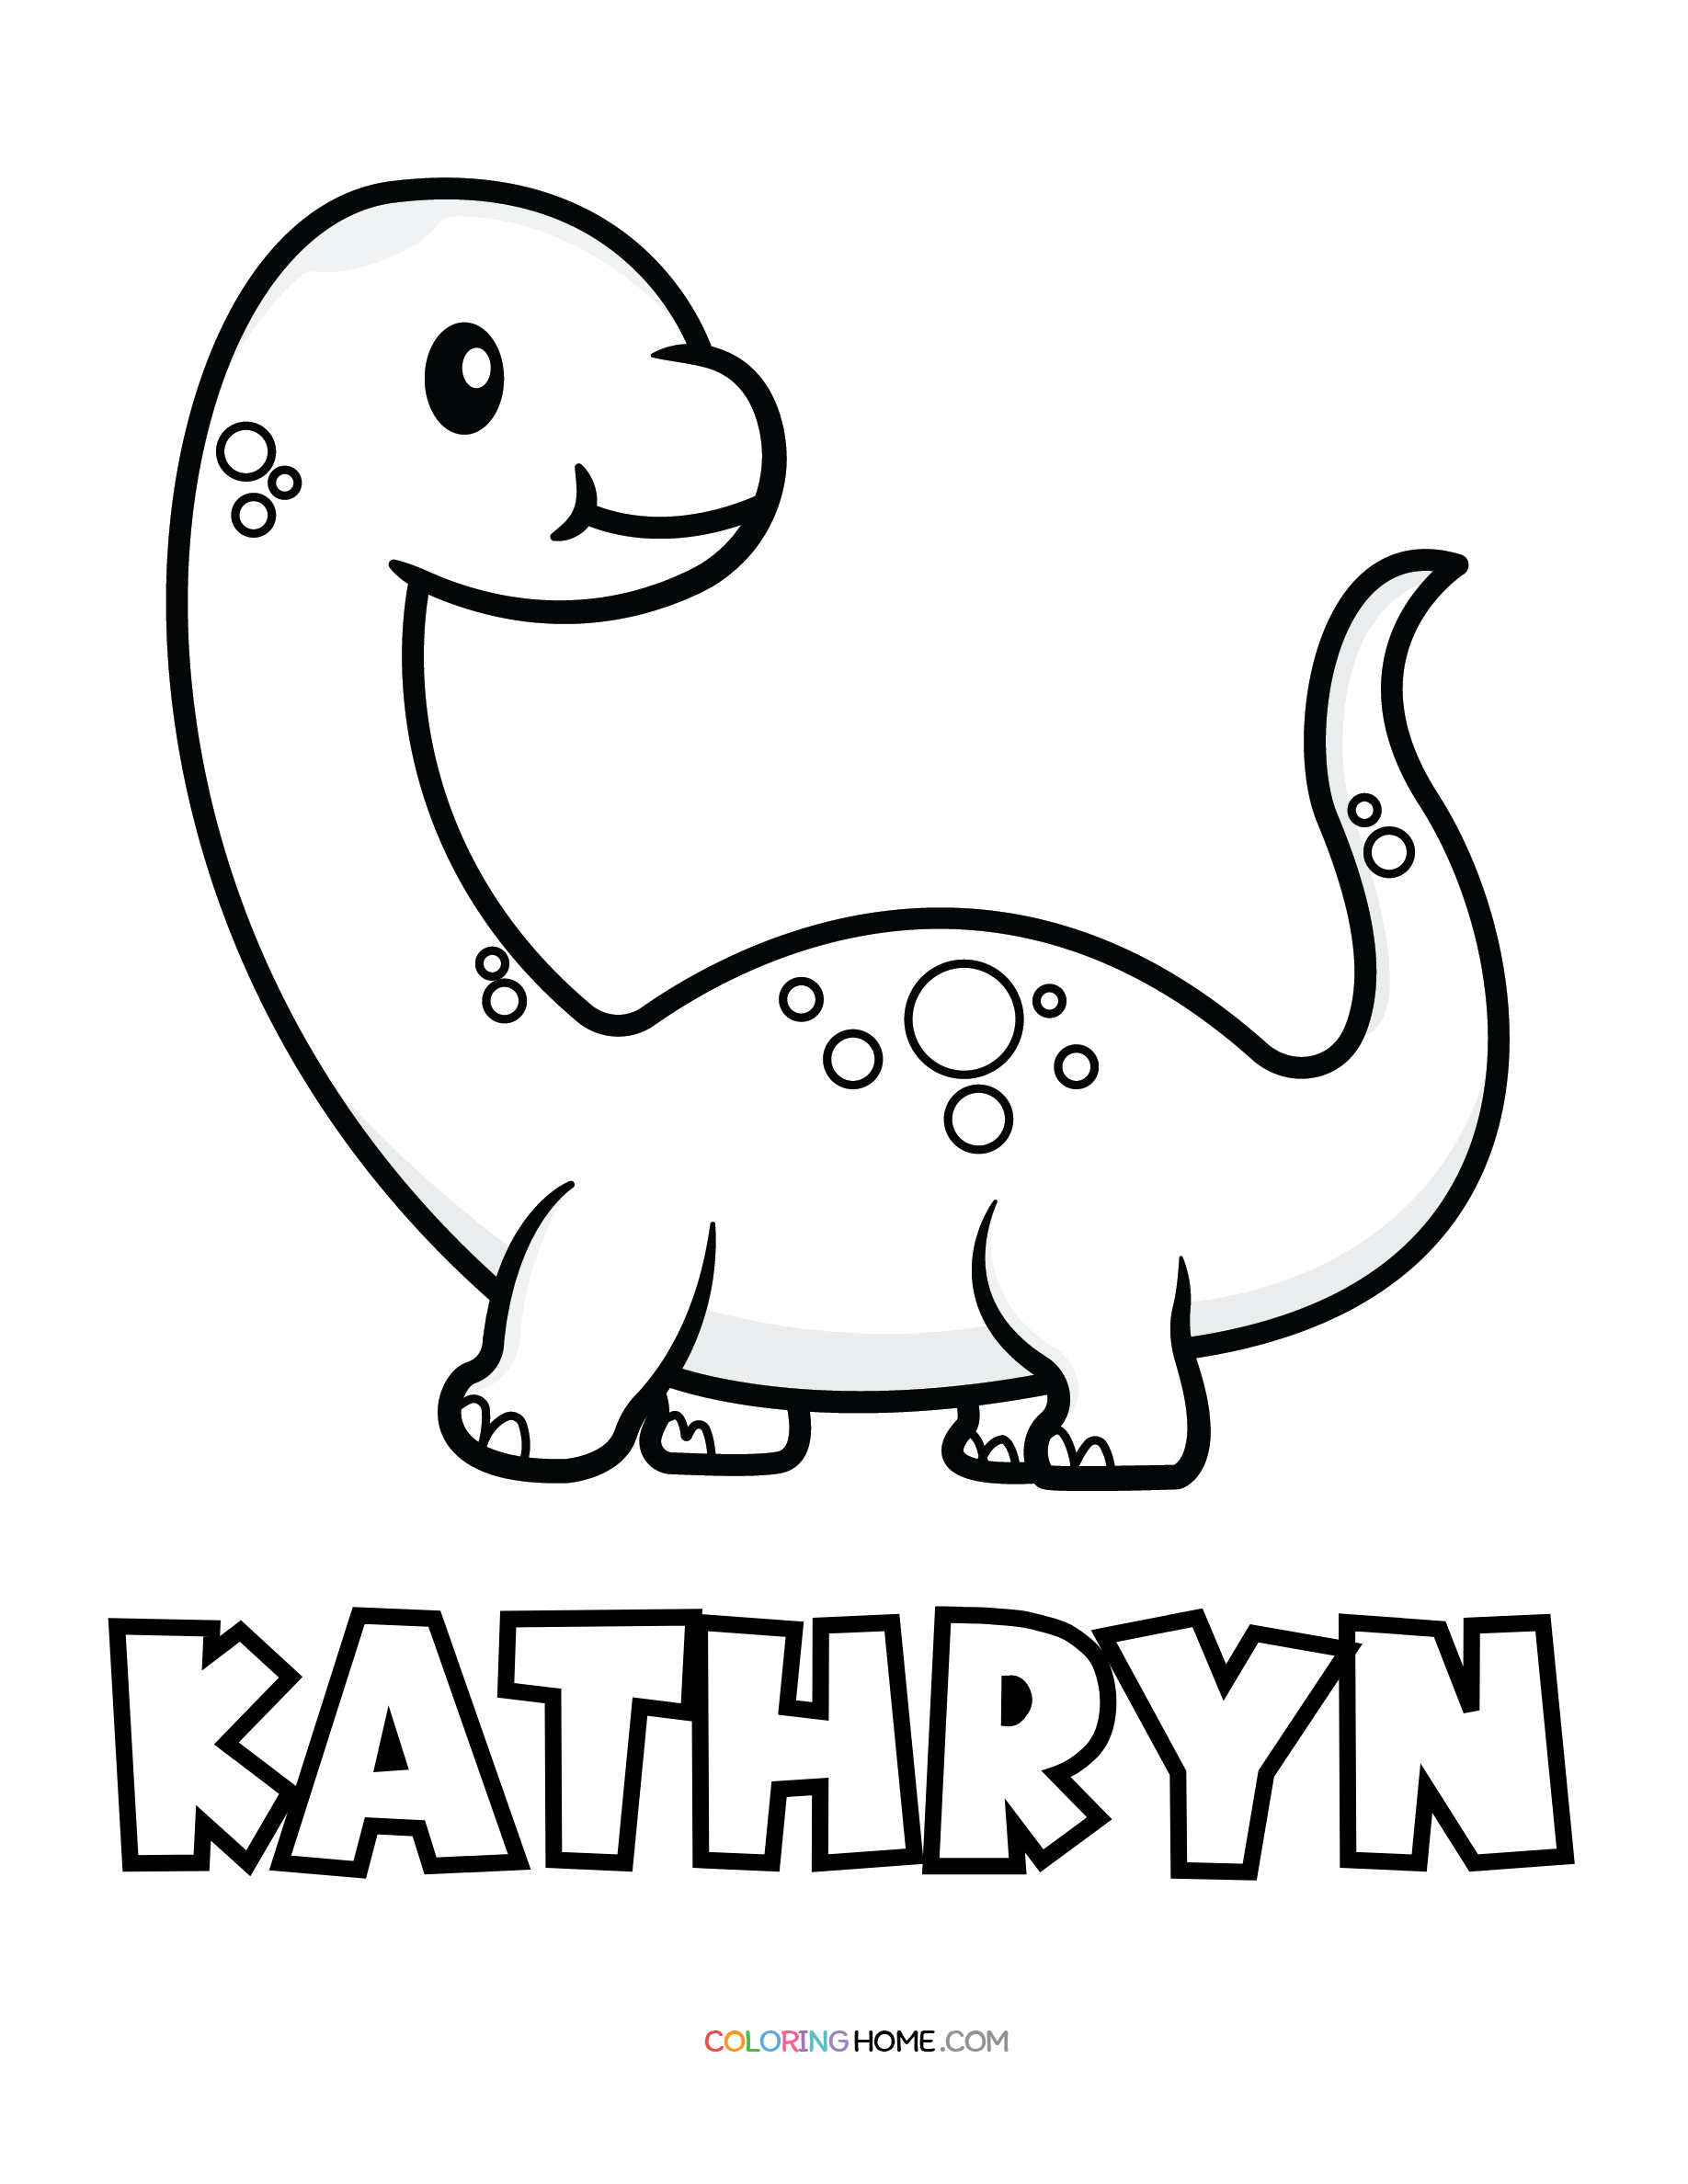 Kathryn dinosaur coloring page